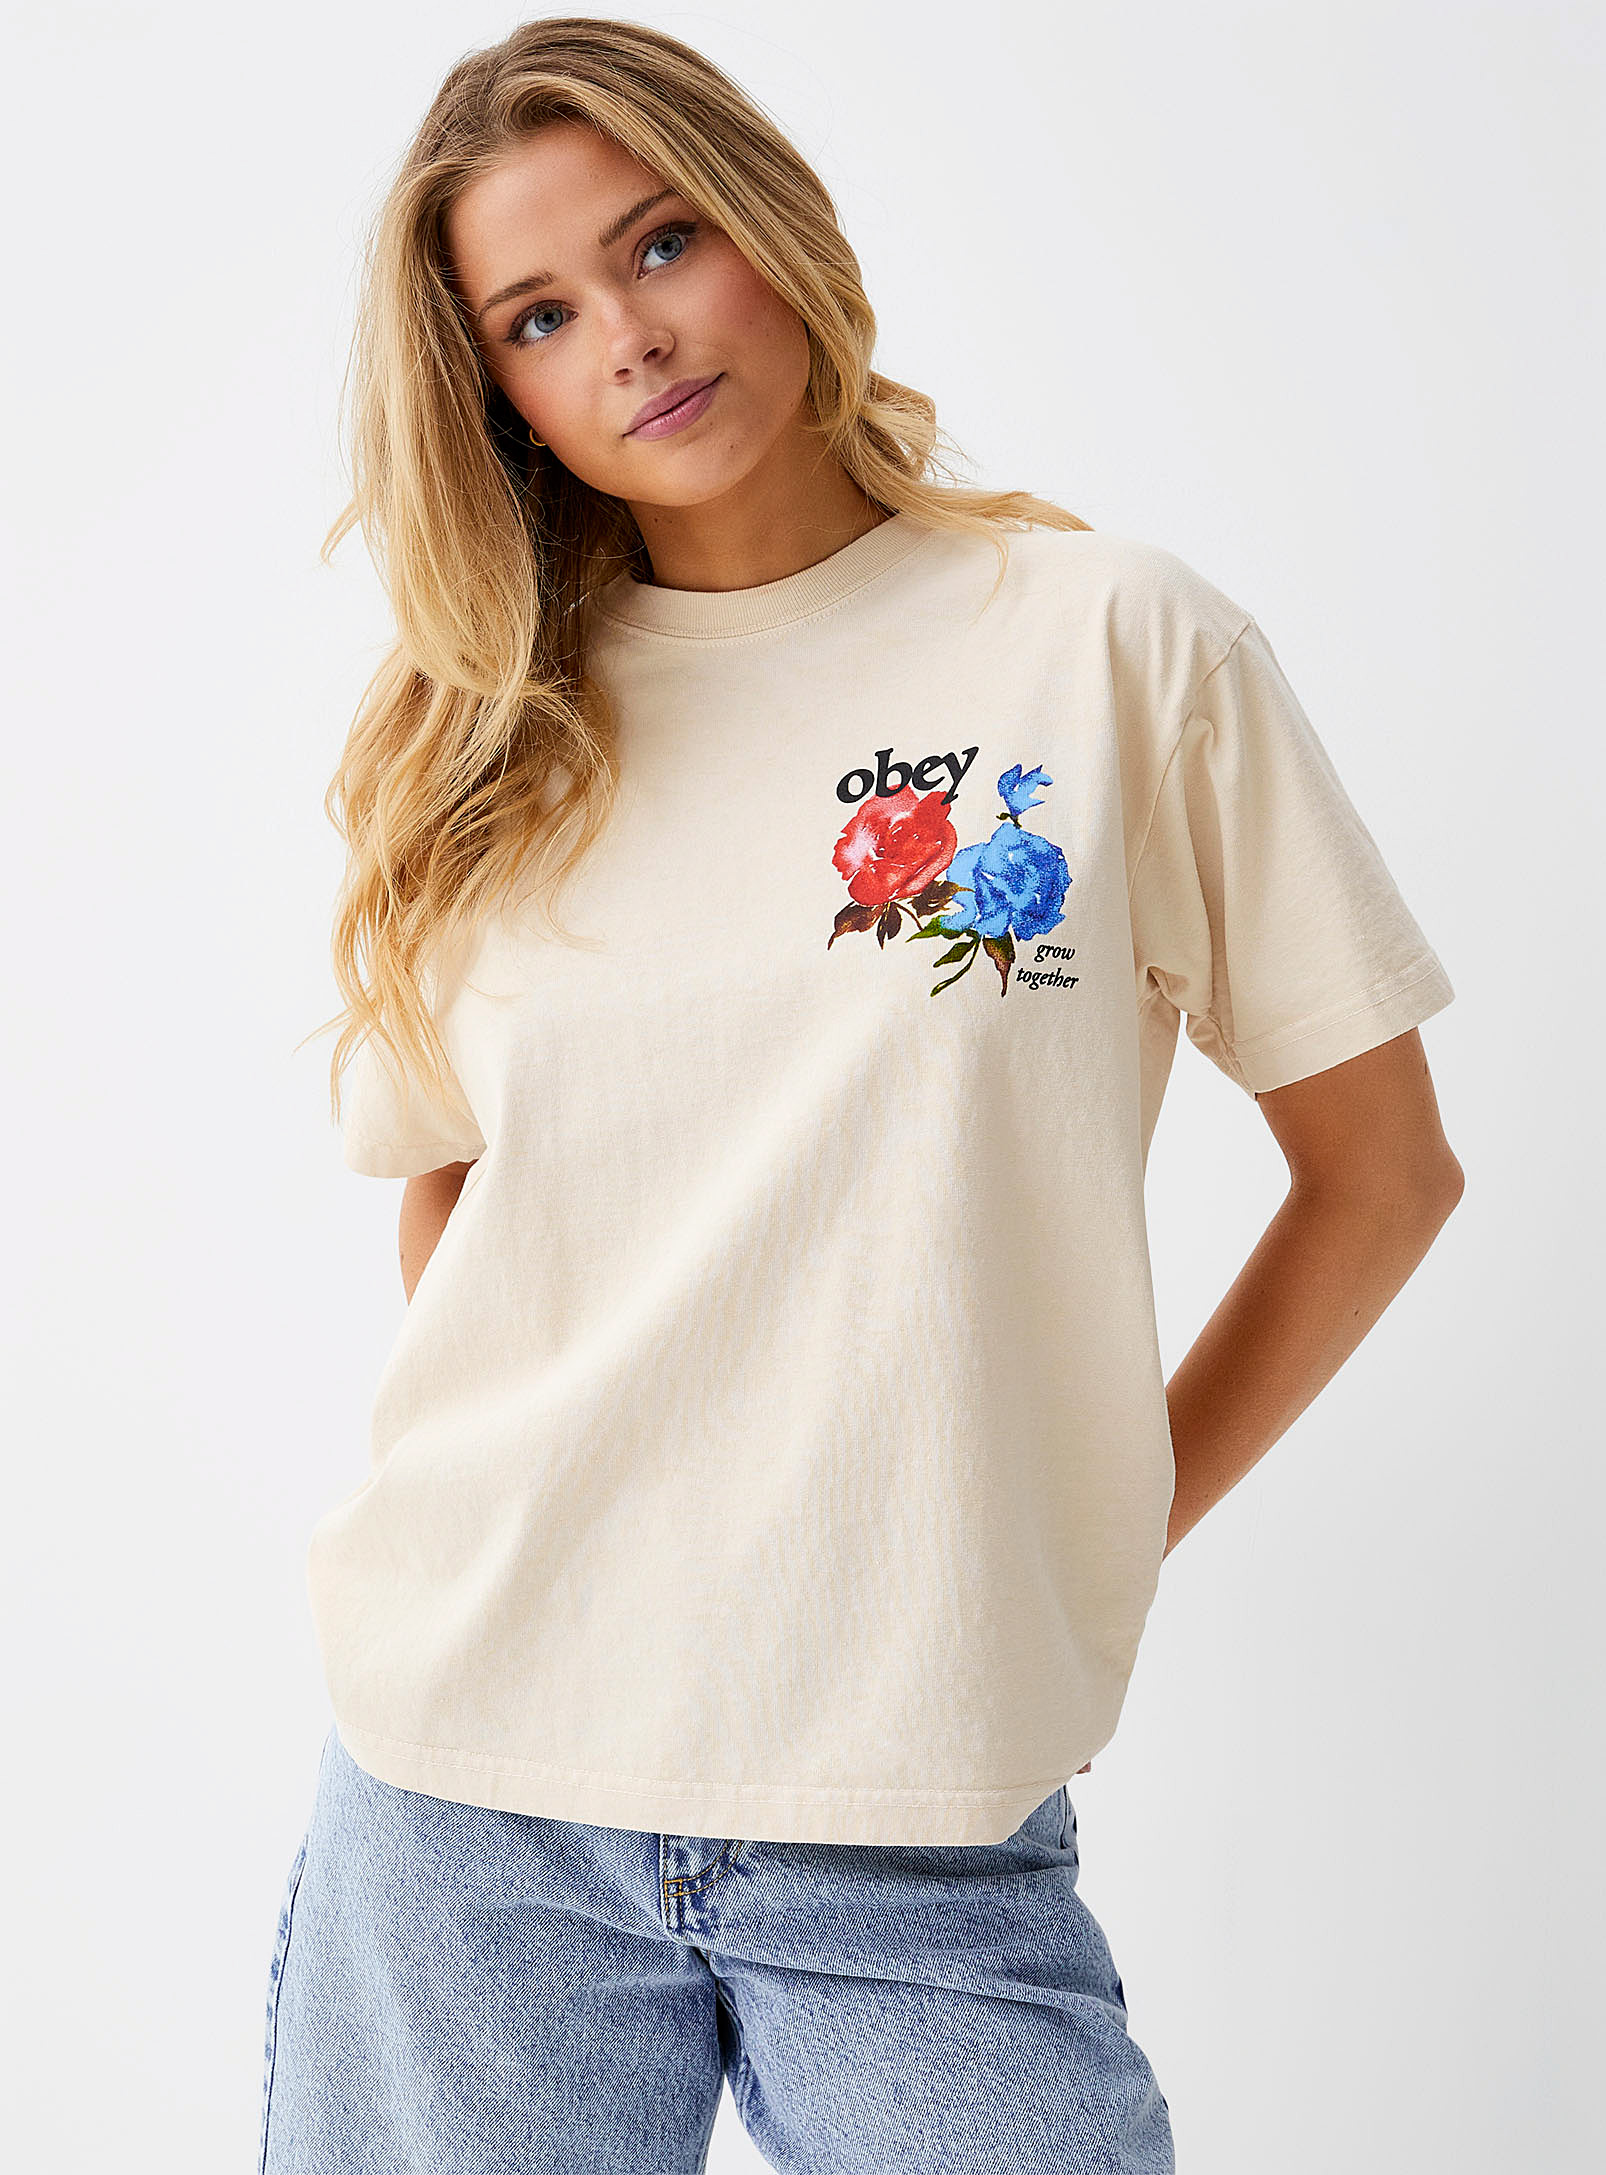 Obey - Women's Grow Together Tee Shirt